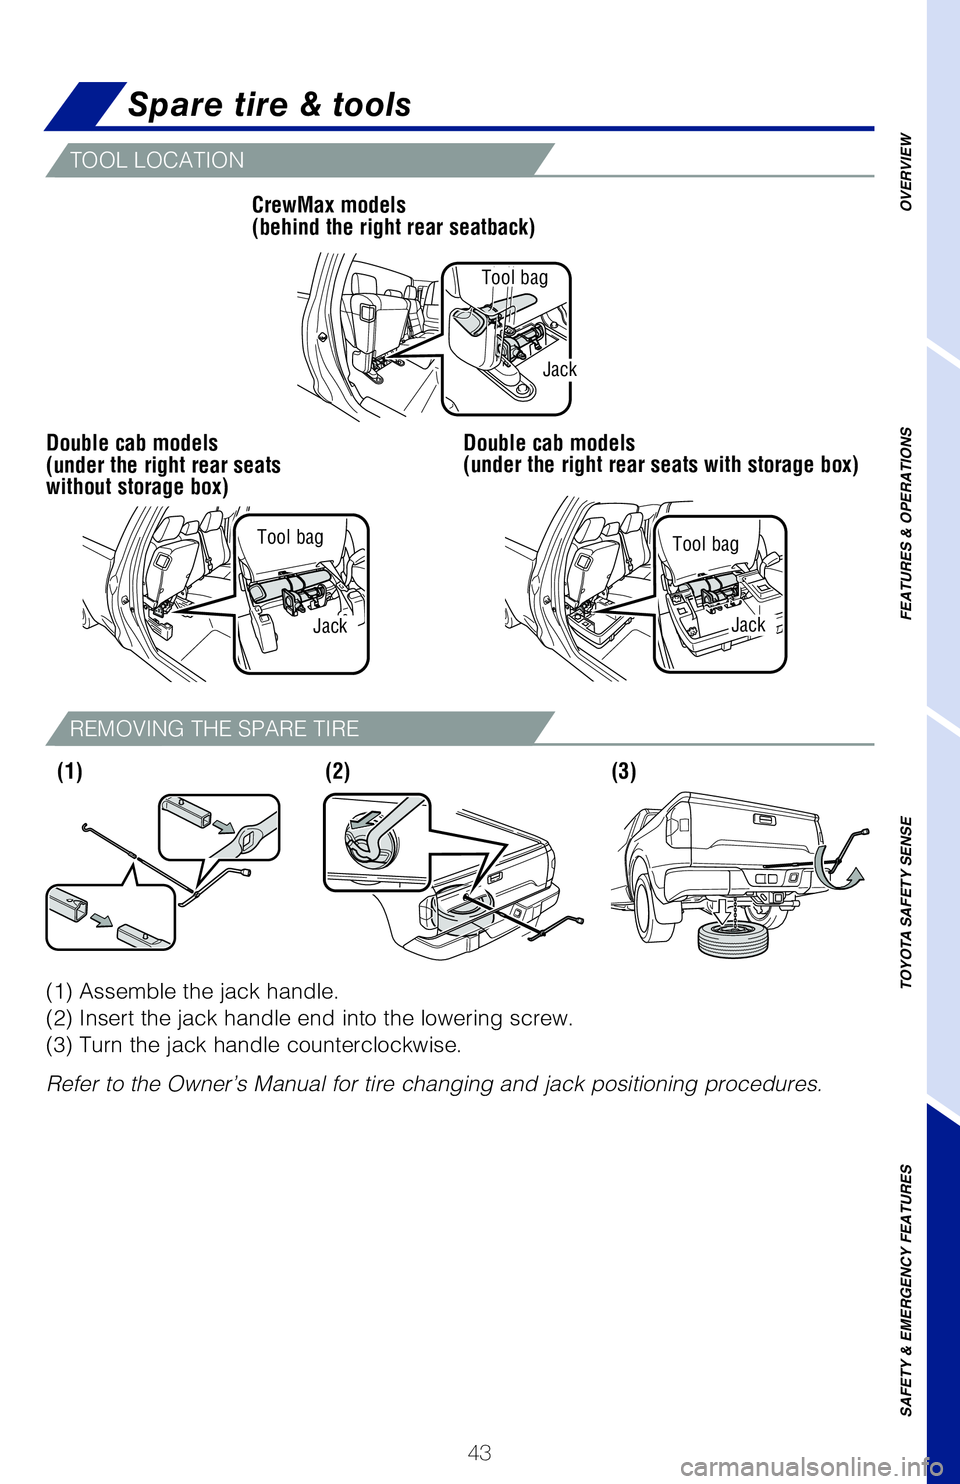 TOYOTA TUNDRA 2020   (in English) Service Manual 43
Spare tire & tools
TOOL LOCATION
REMOVING THE SPARE TIRE
(1) Assemble the jack handle. 
(2) Insert the jack handle end into the lowering screw.
(3) Turn the jack handle counterclockwise. 
Refer to 